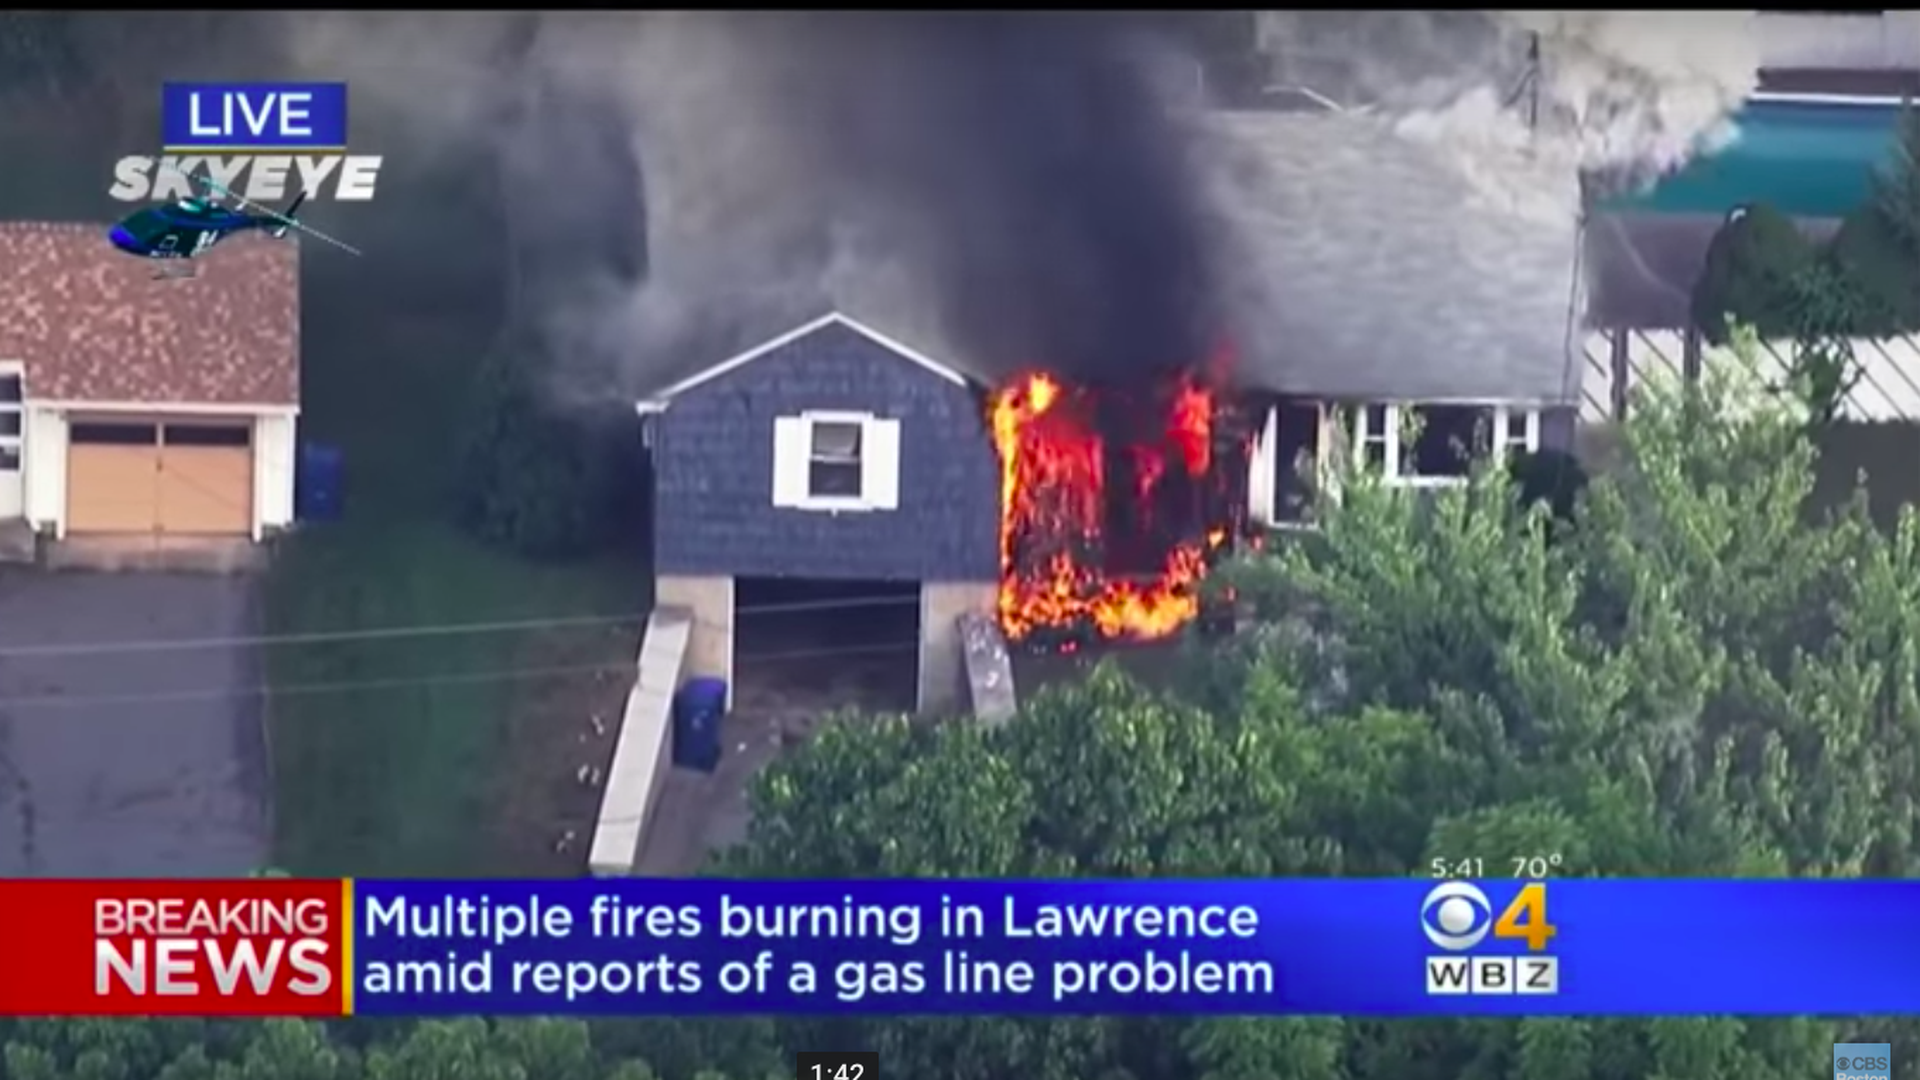 Flames consuming a home in Lawrence, Massachusetts. Photo via CBS Boston Youtube page.